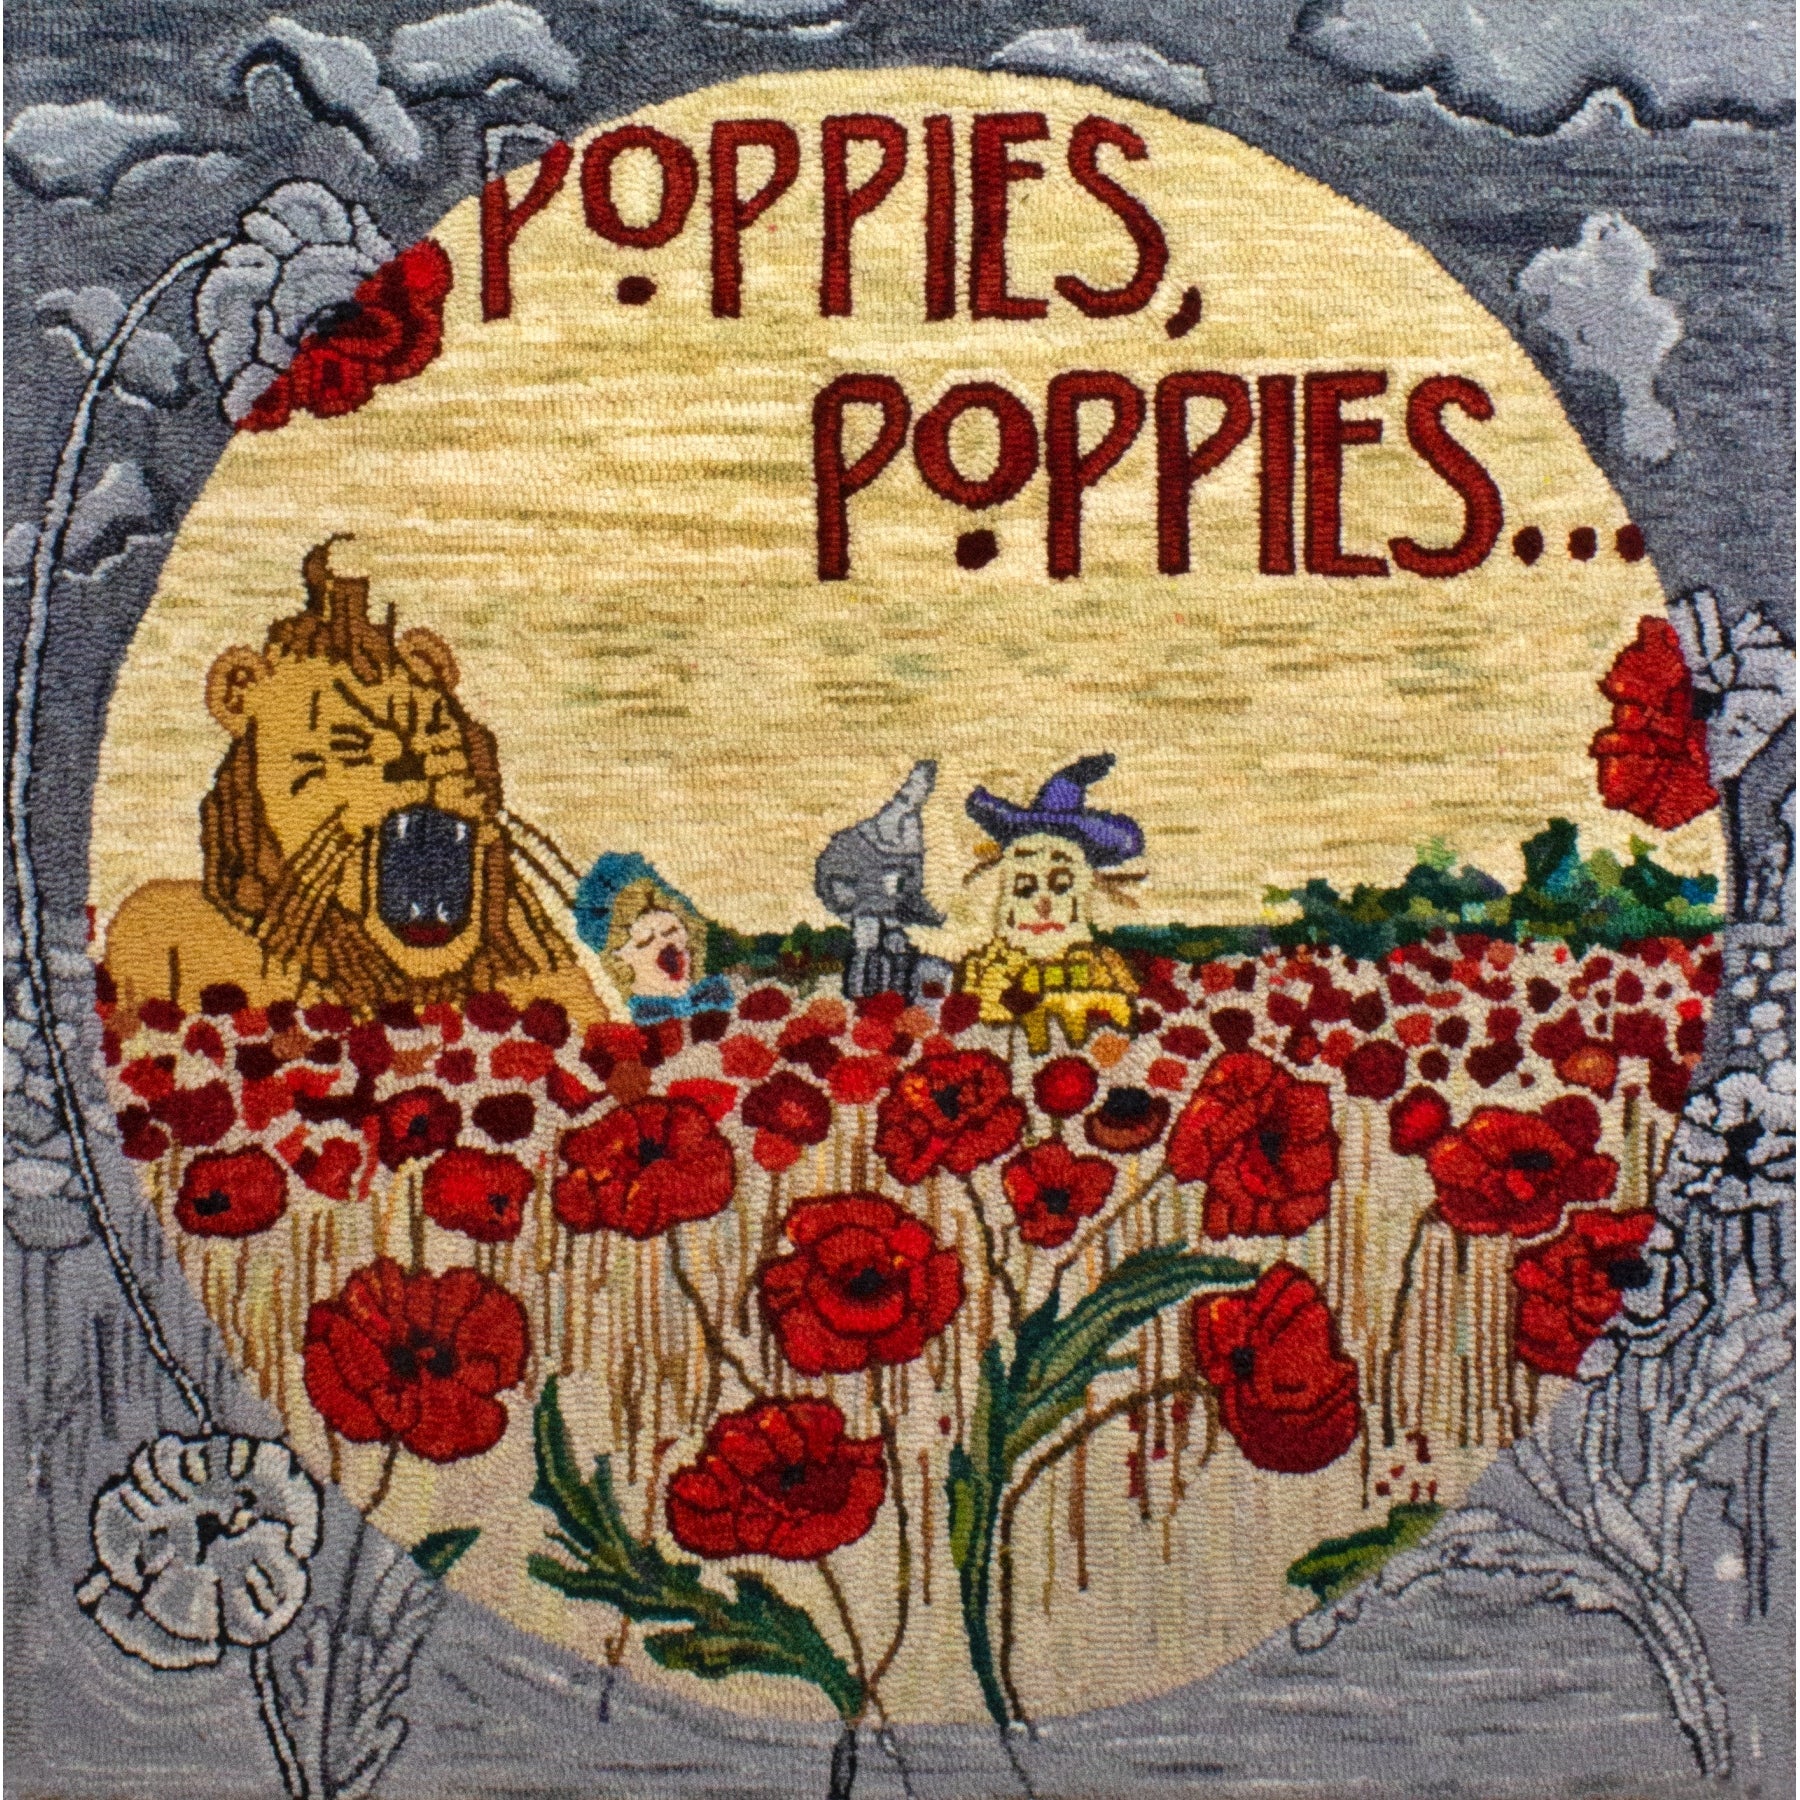 Poppies, Poppies, ill. William Denslow, 1900, rug hooked by Nancy Gingrich